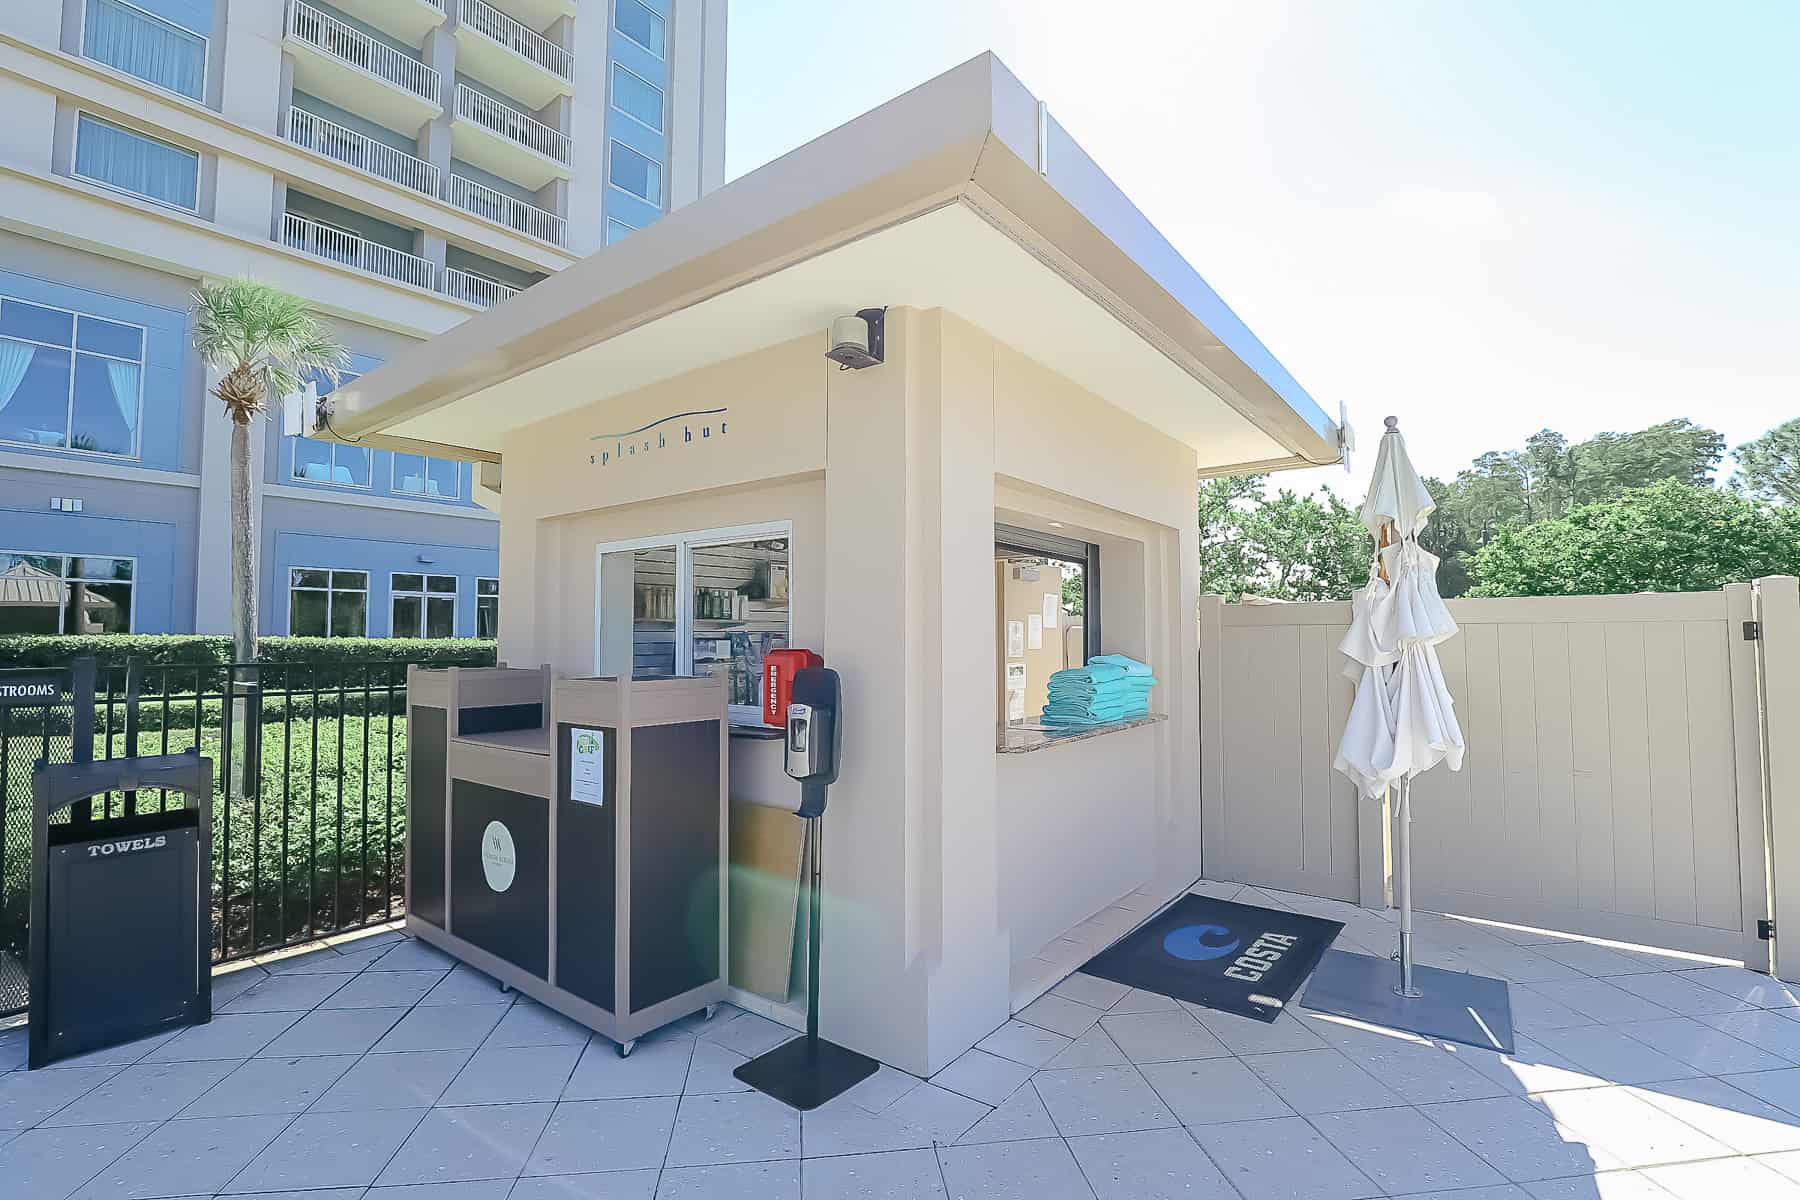 the Splash Hut where you can pick up towels and other convenience items at the pool 